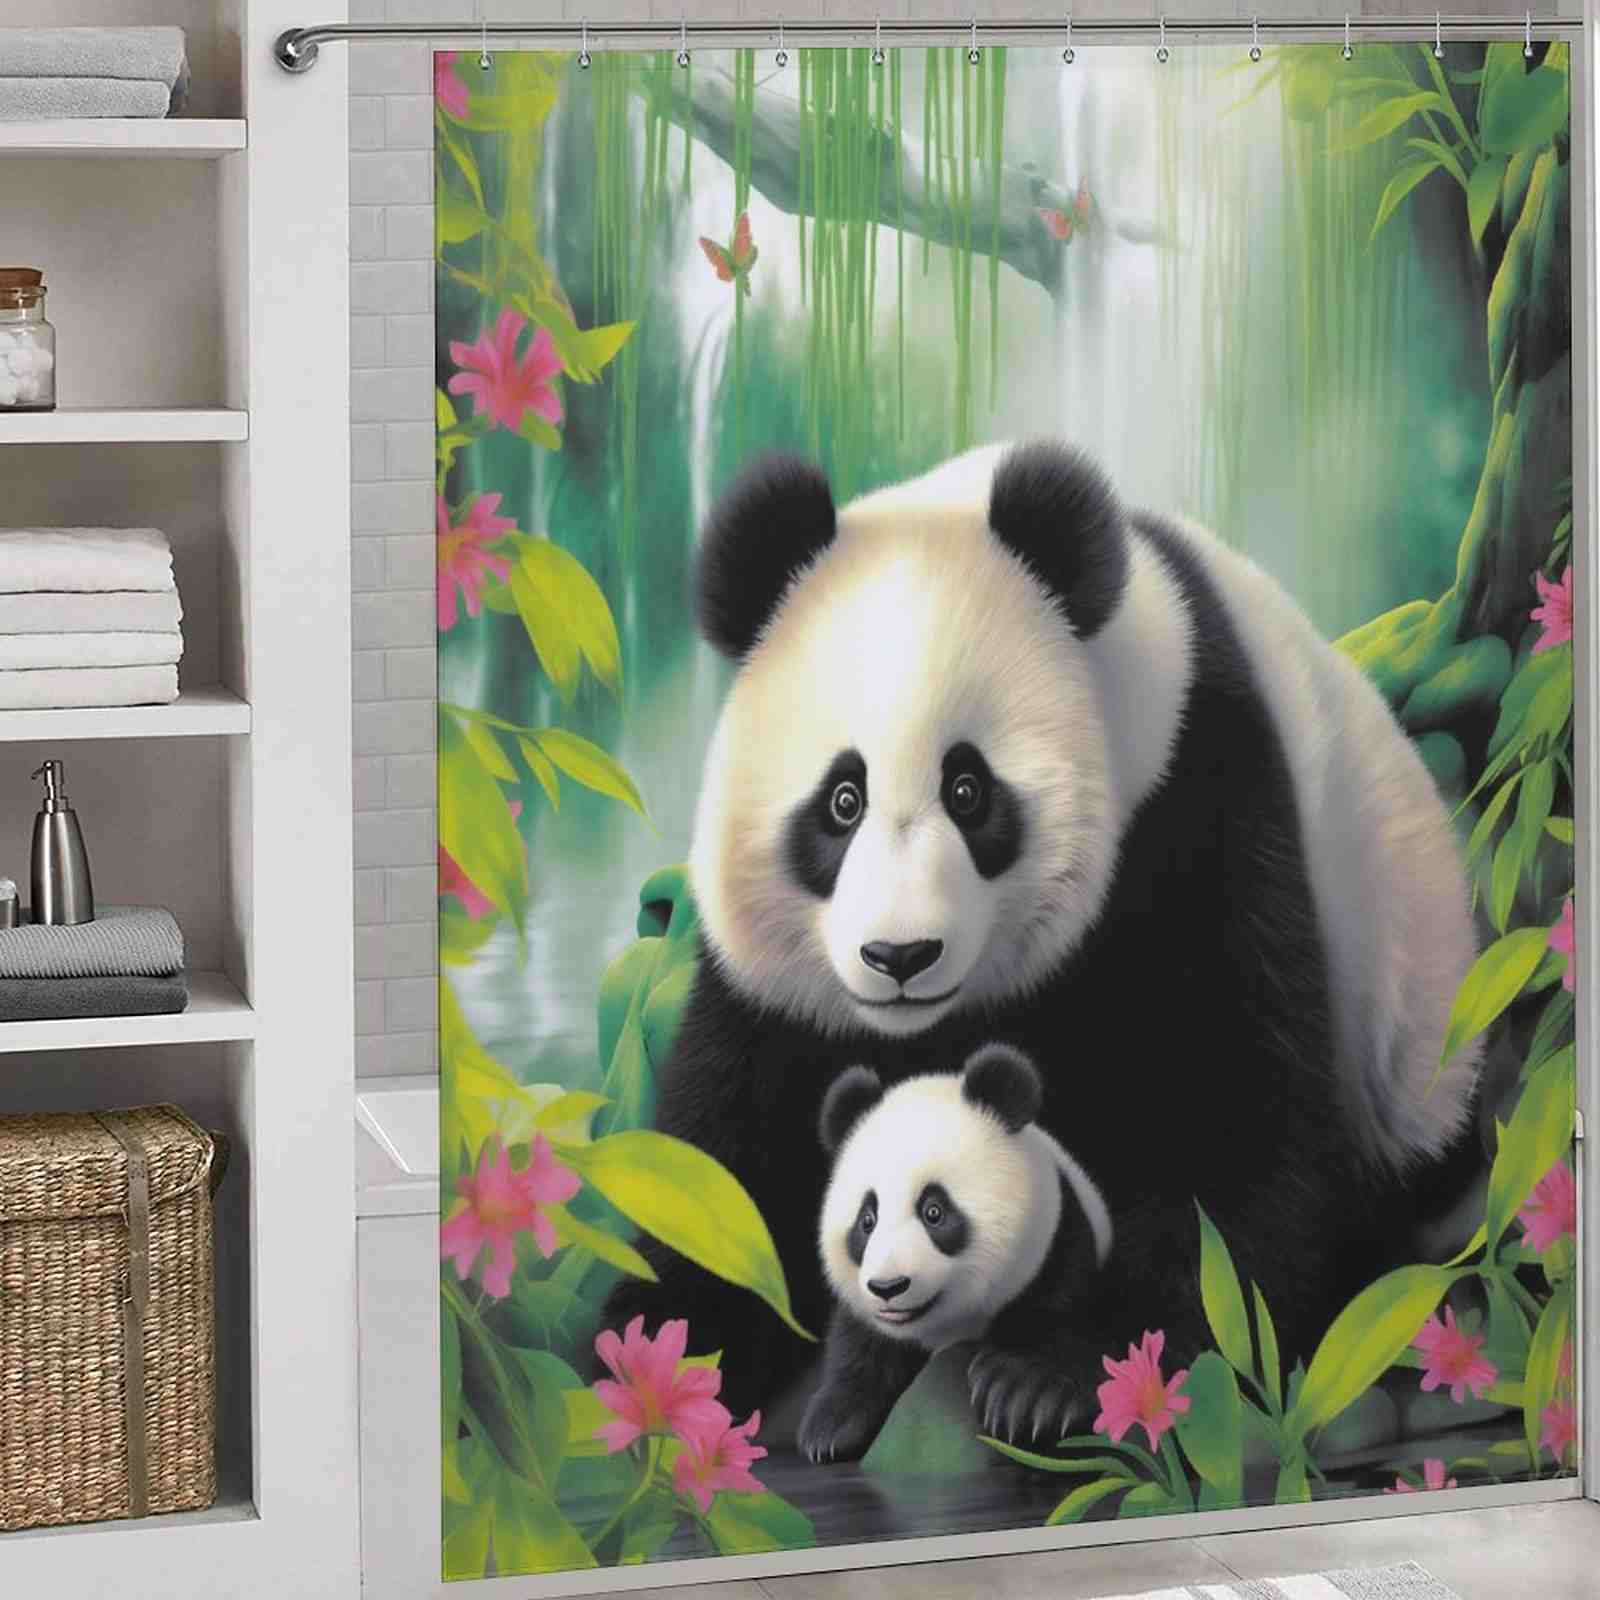 Enhance your bathroom decor with this adorable and visually appealing 3D Cute Panda Shower Curtain-Cottoncat, perfect for a panda lover or even a baby shower.